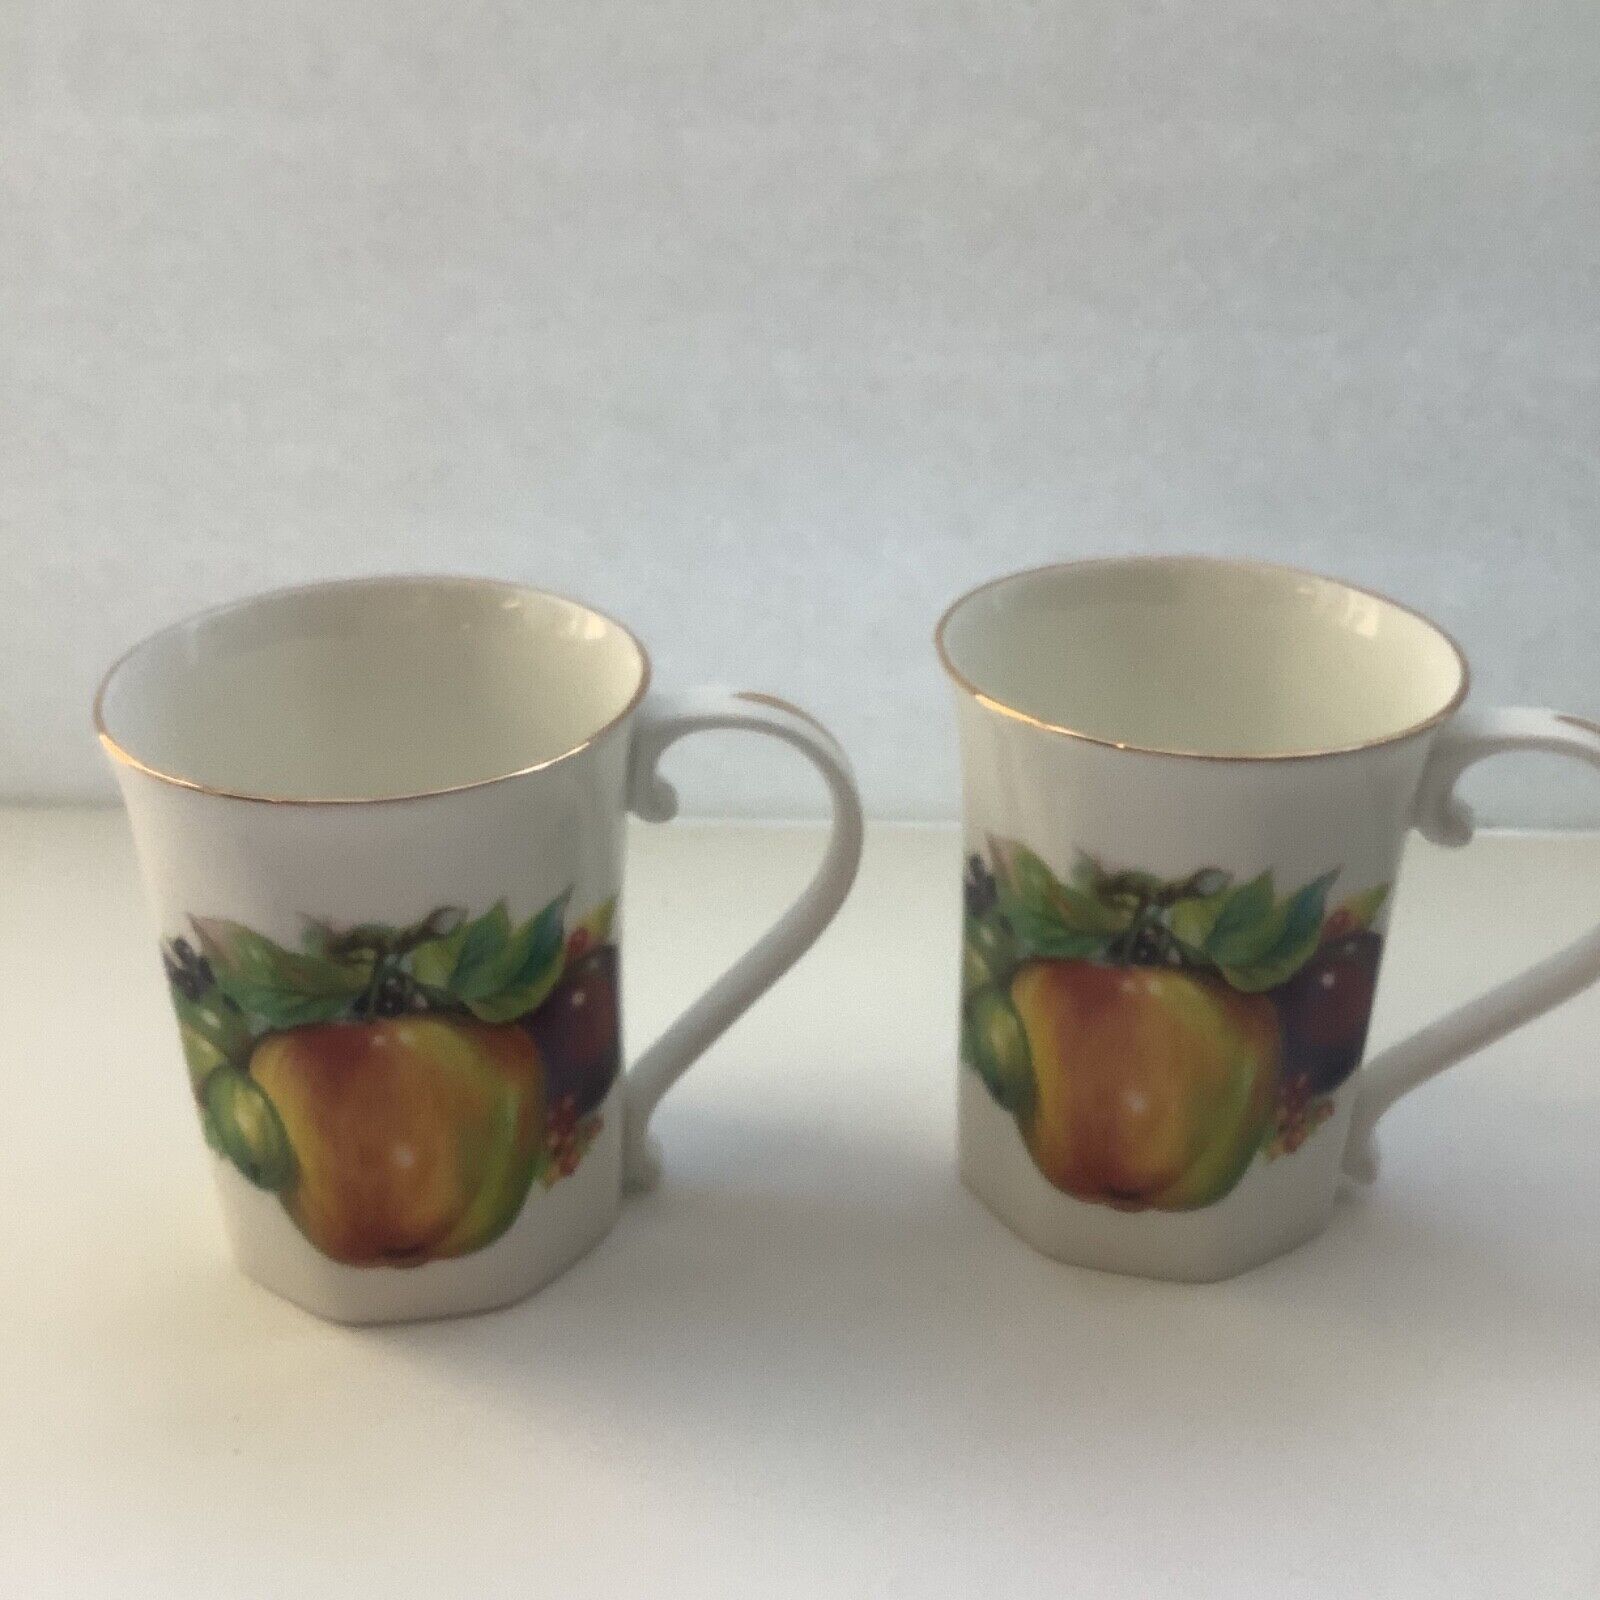 Pair of Staffordshire  Fine Bone China Mugs with Fruit Design Made in England